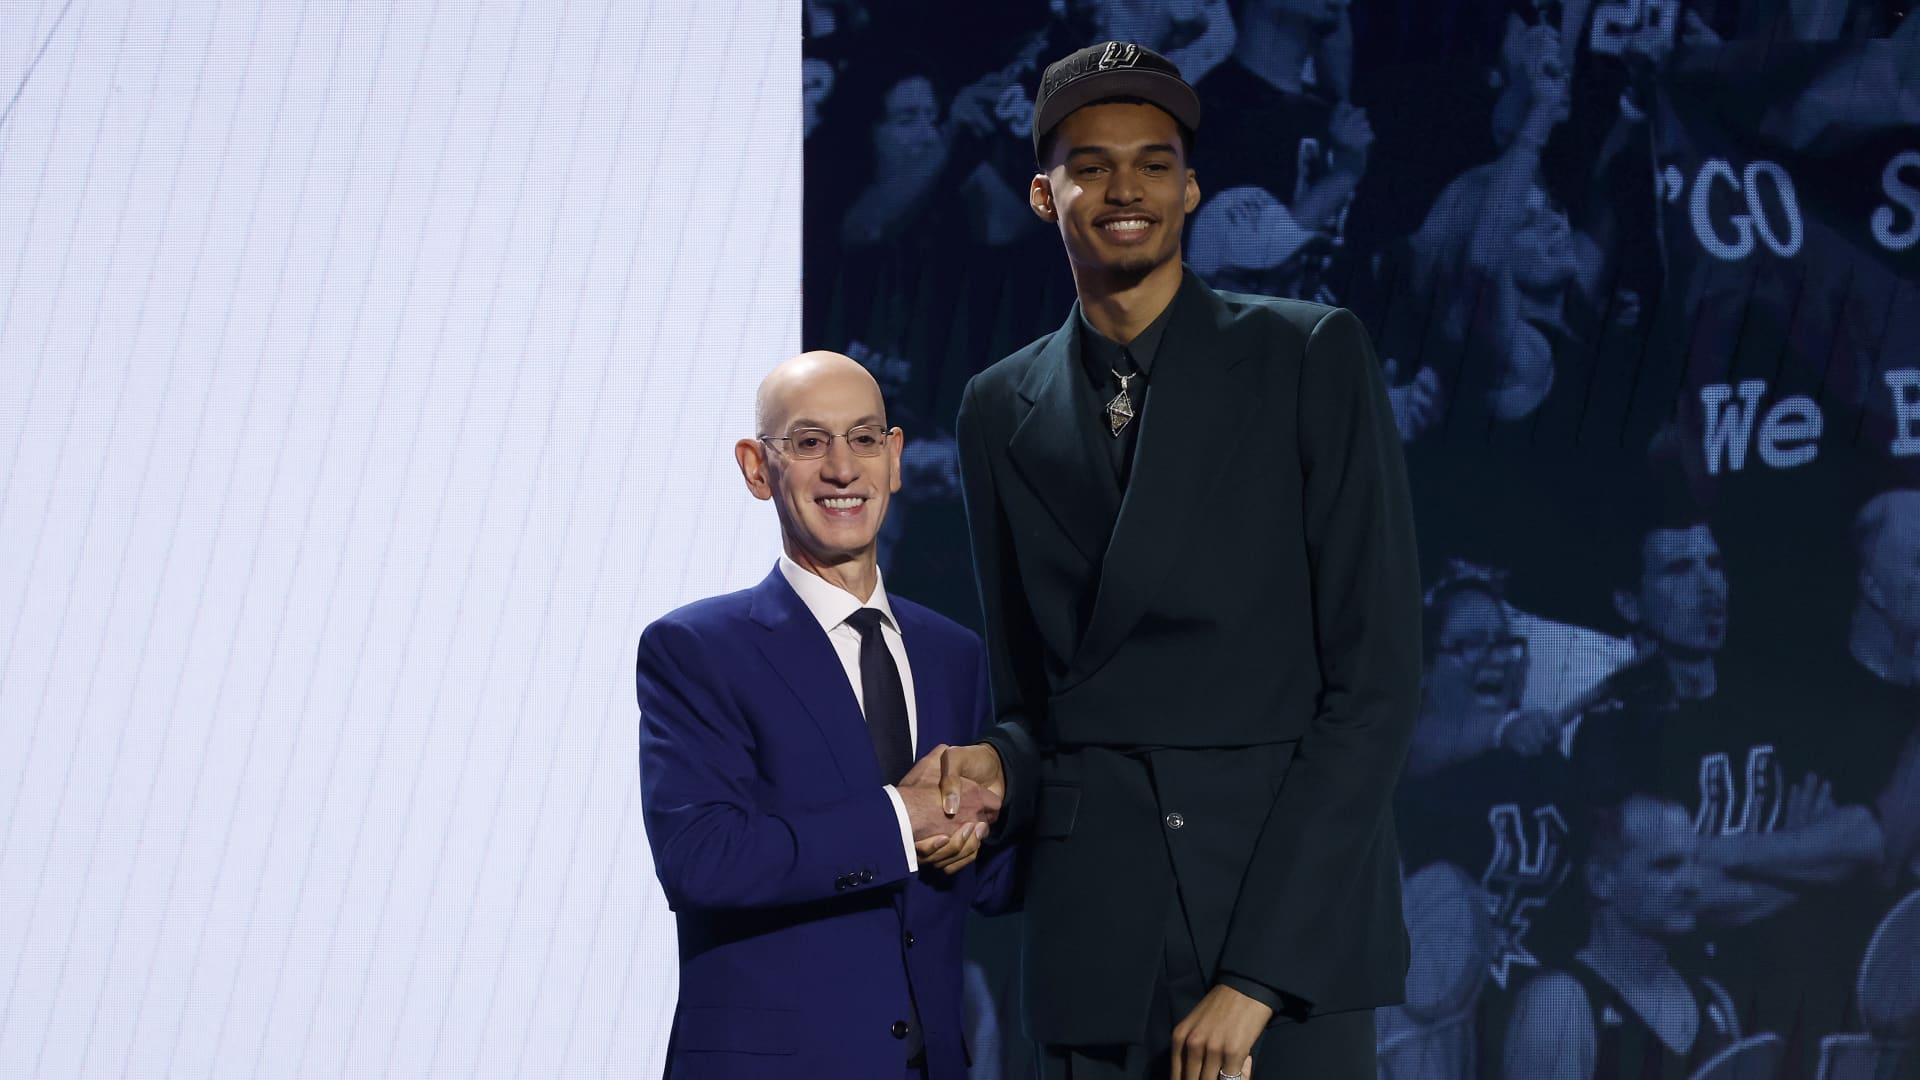 Victor Wembanyama poses with NBA commissioner Adam Silver after being drafted first overall by the San Antonio Spurs during the first round of the 2023 NBA Draft.